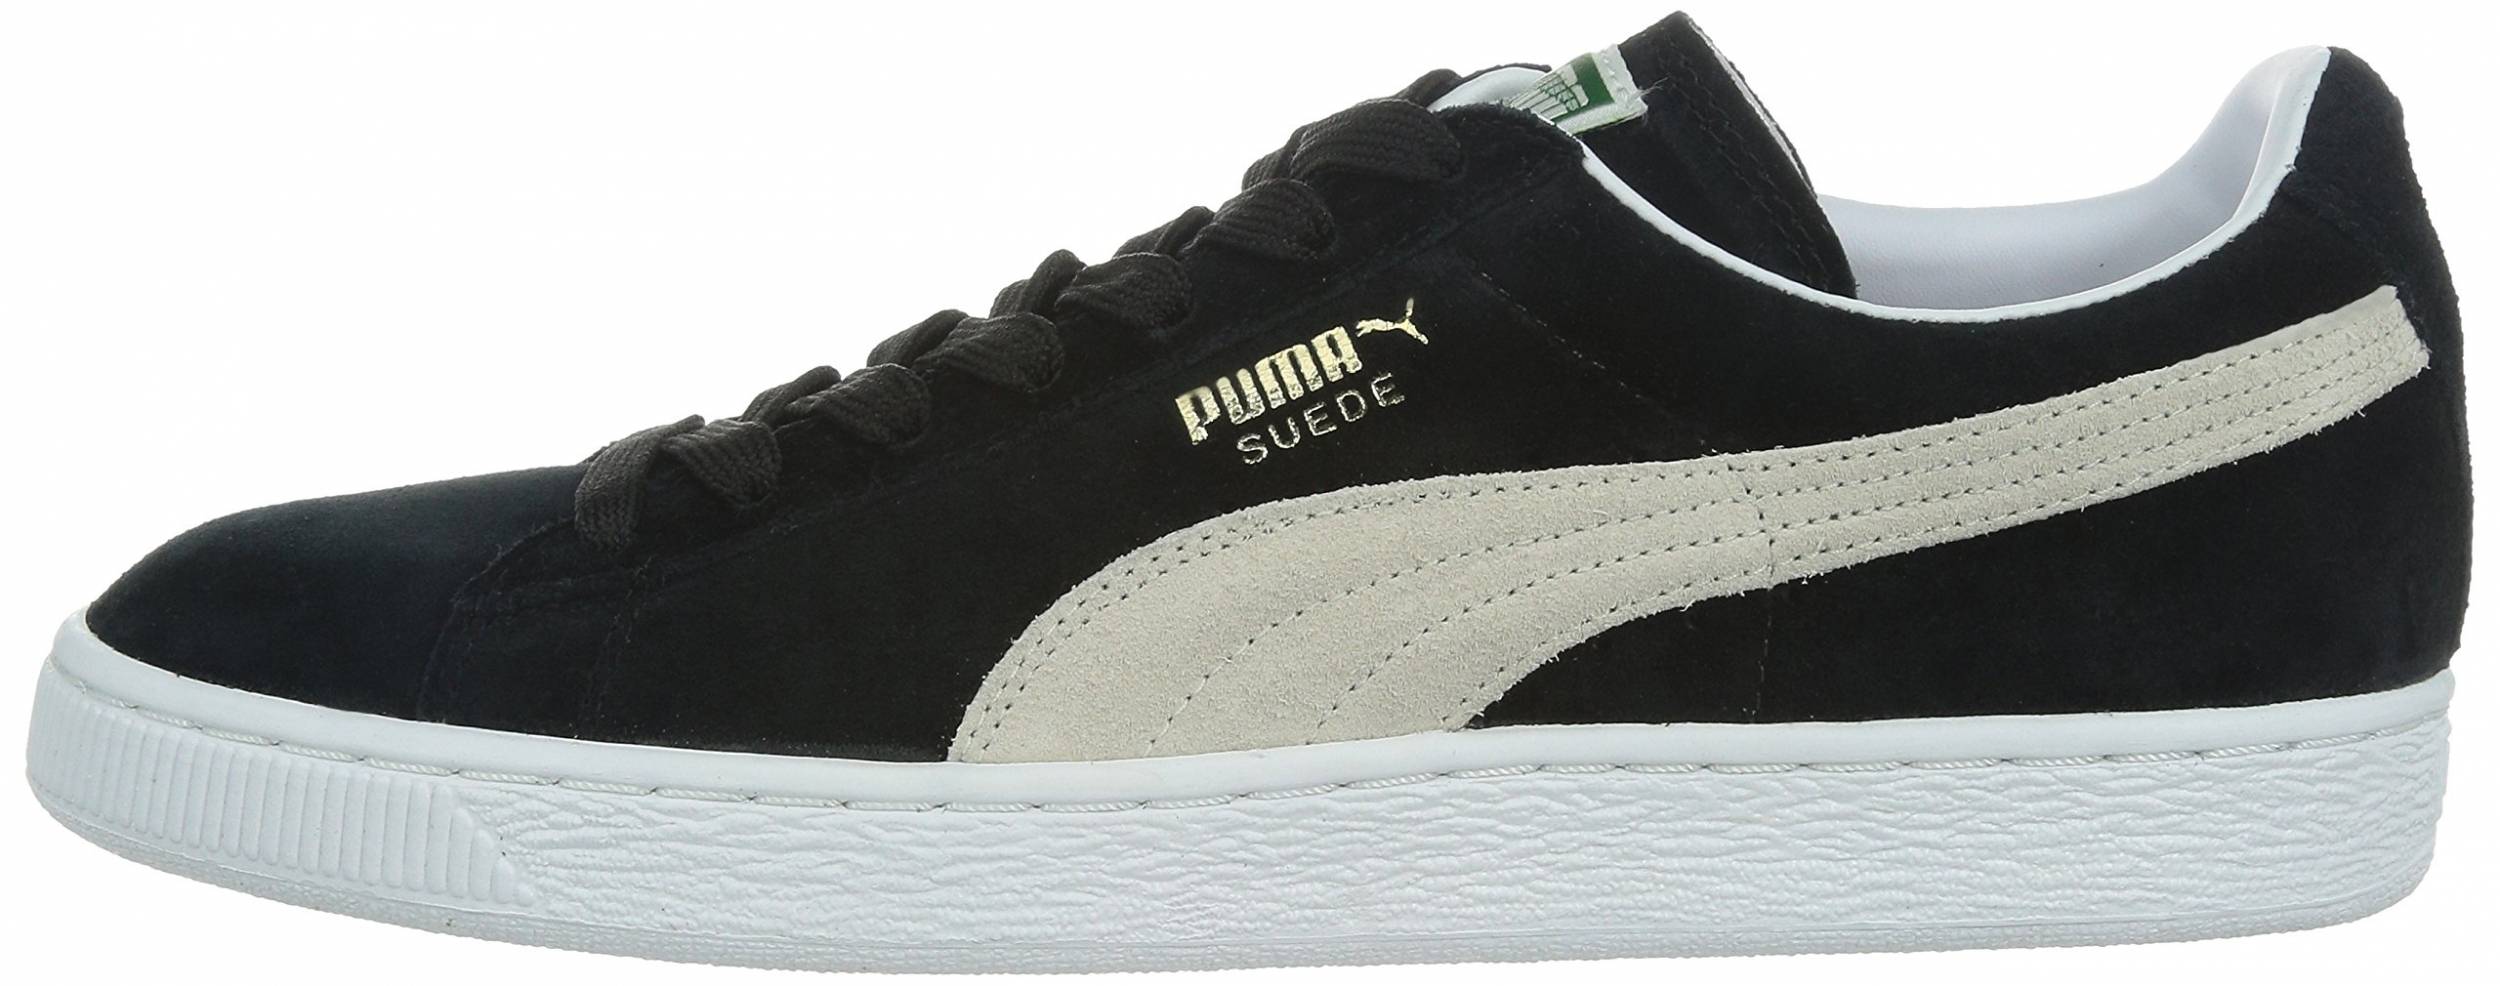 Save 55% on Puma Suede Sneakers (51 